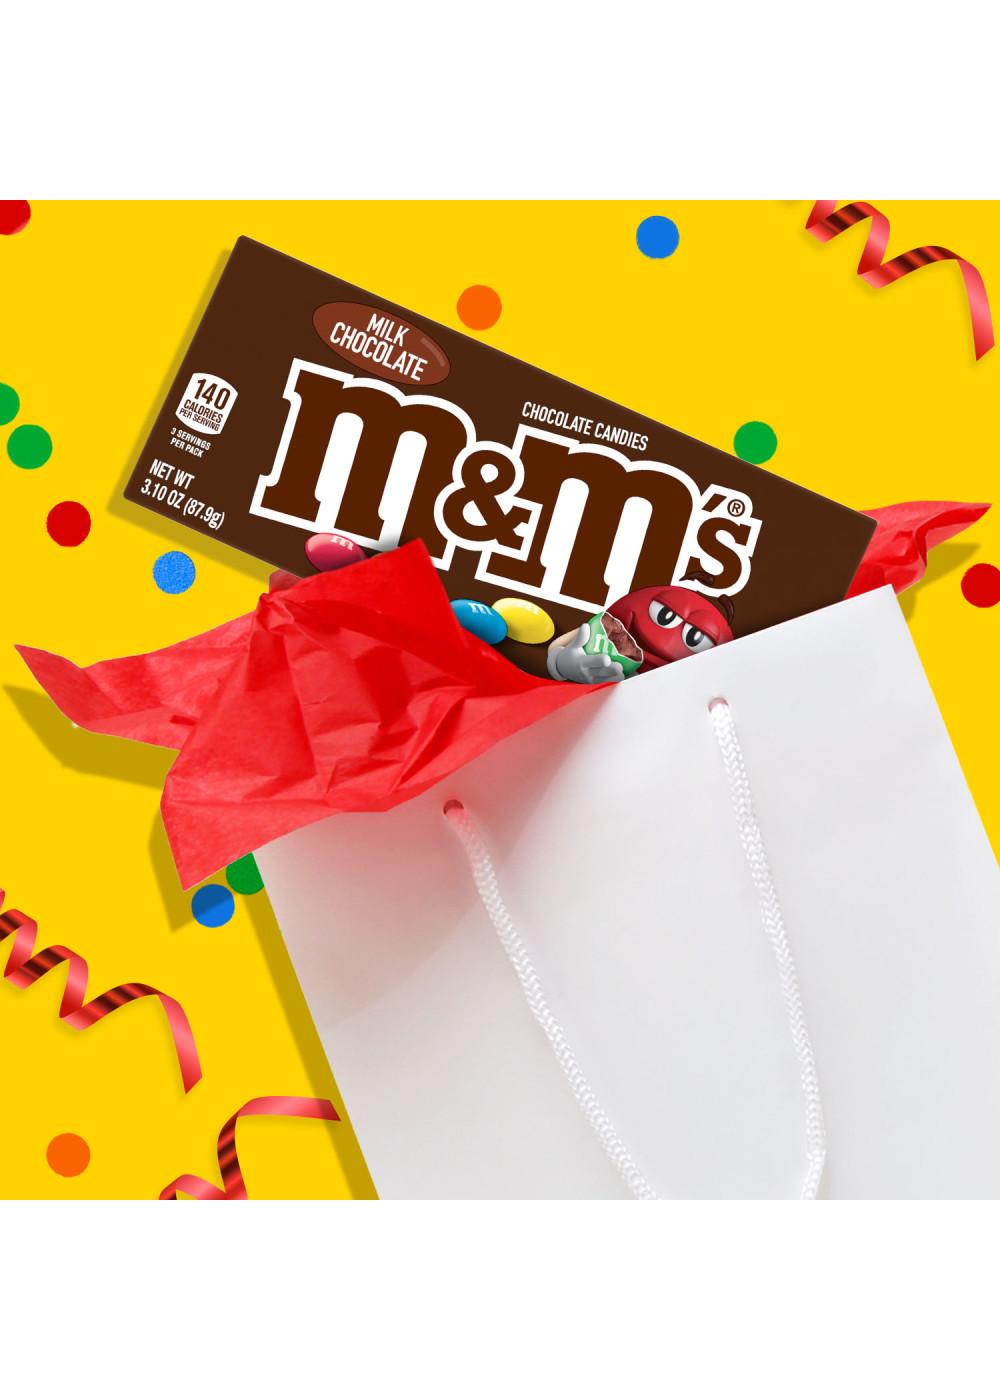 M&M'S Milk Chocolate Candy Theater Box - Shop Candy at H-E-B